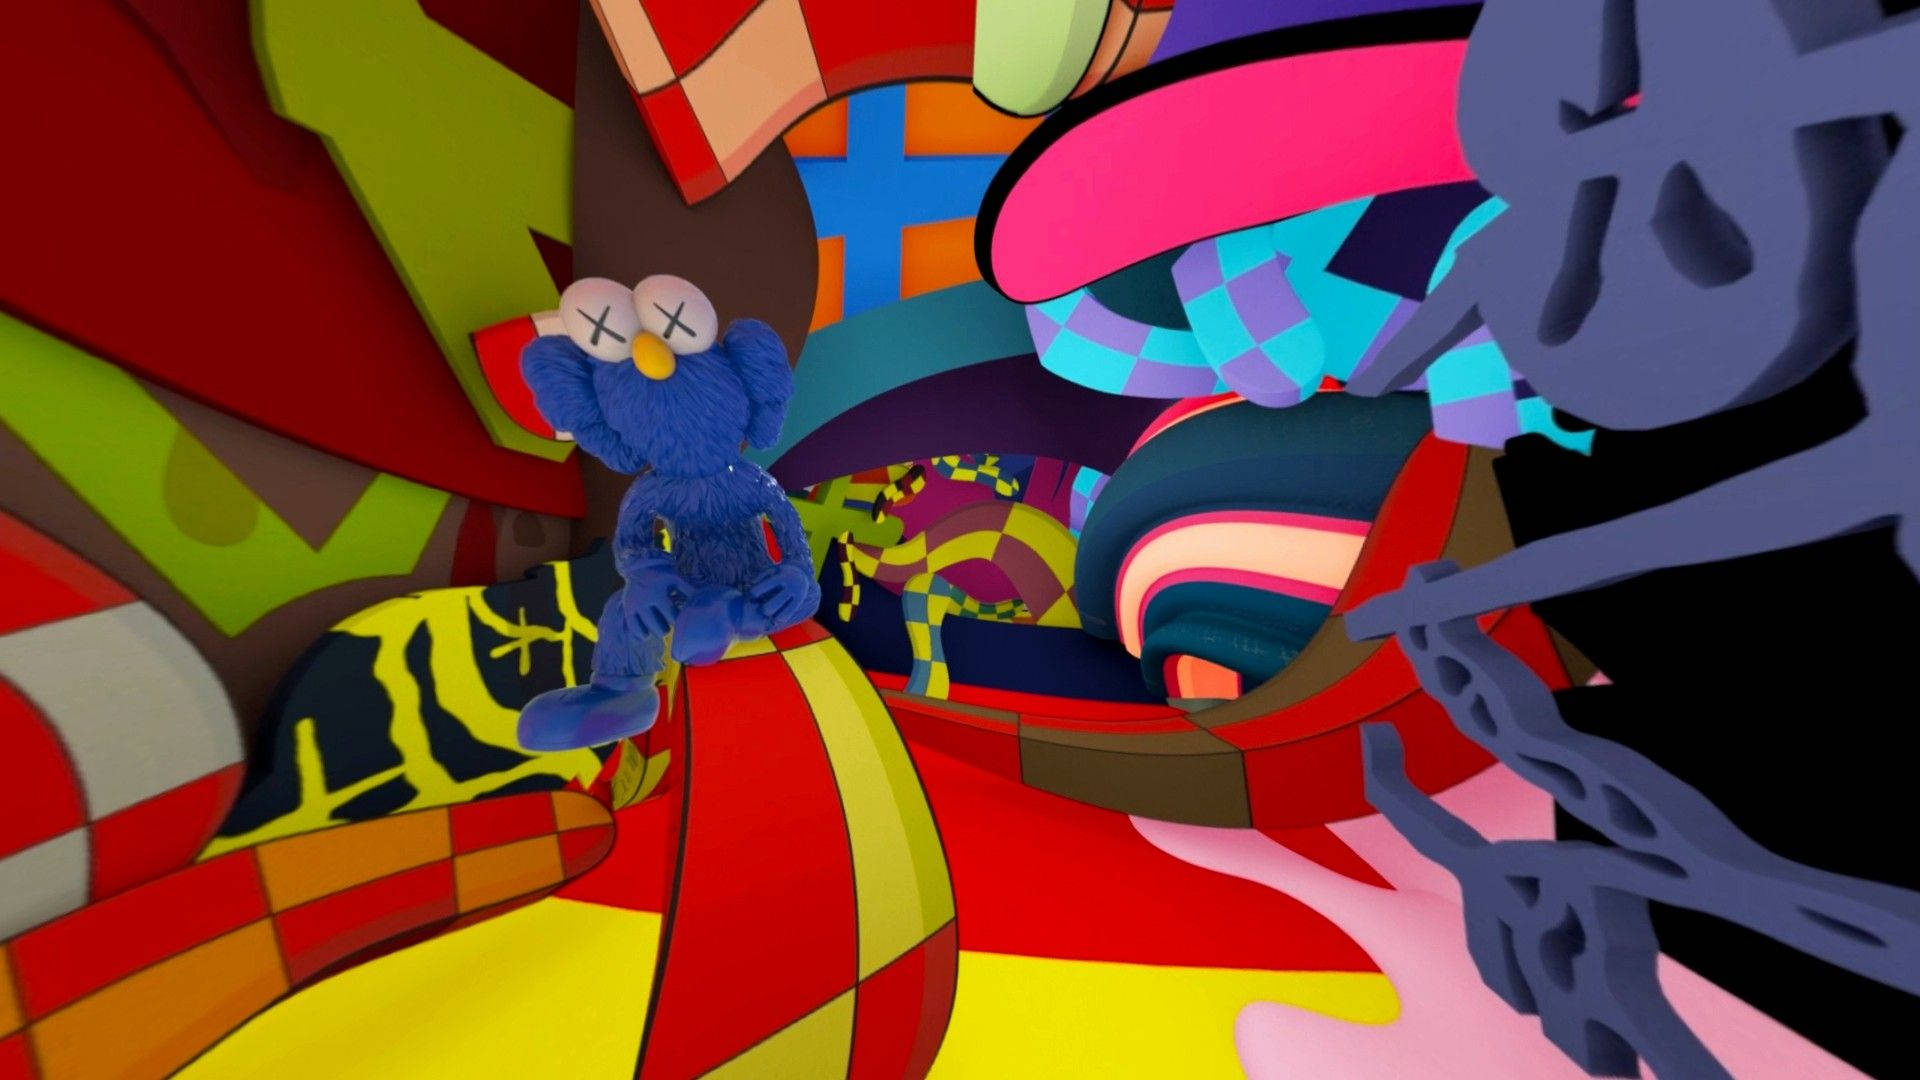 Kaws Bff Abstract World Art Background